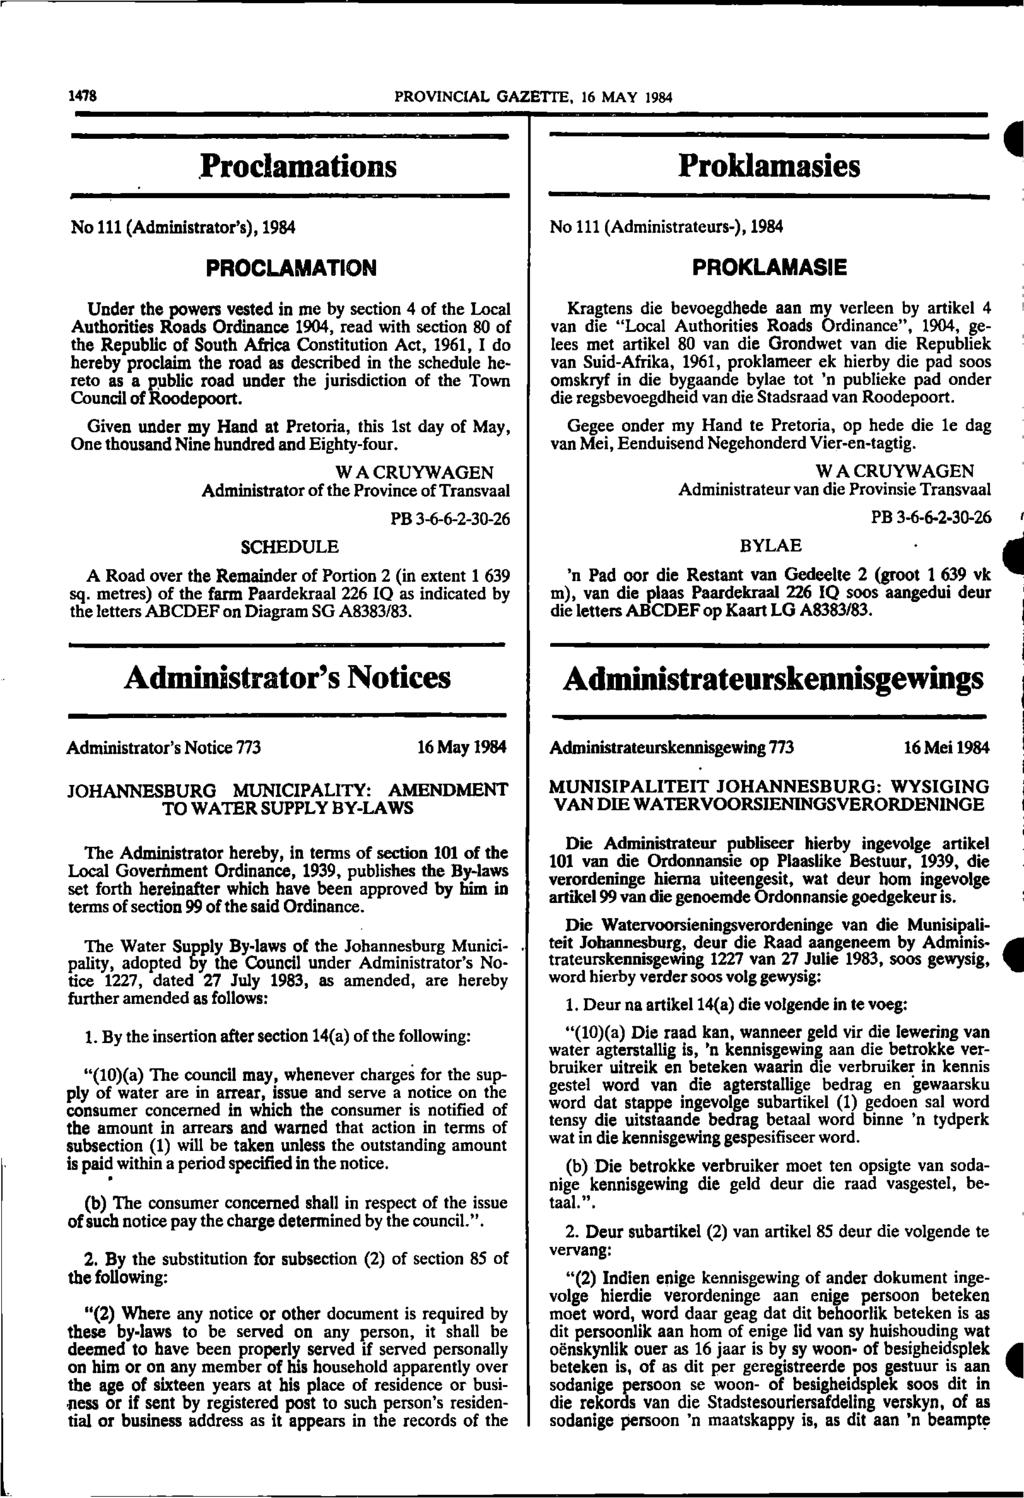 1478 PROVINCIAL GAZETTE, 16 MAY 1984 No 111 (Administrator s), 1984 Proclamations PROCLAMATION Under the powers vested in me by section 4 of the Local Authorities Roads Ordinance 1904, read with